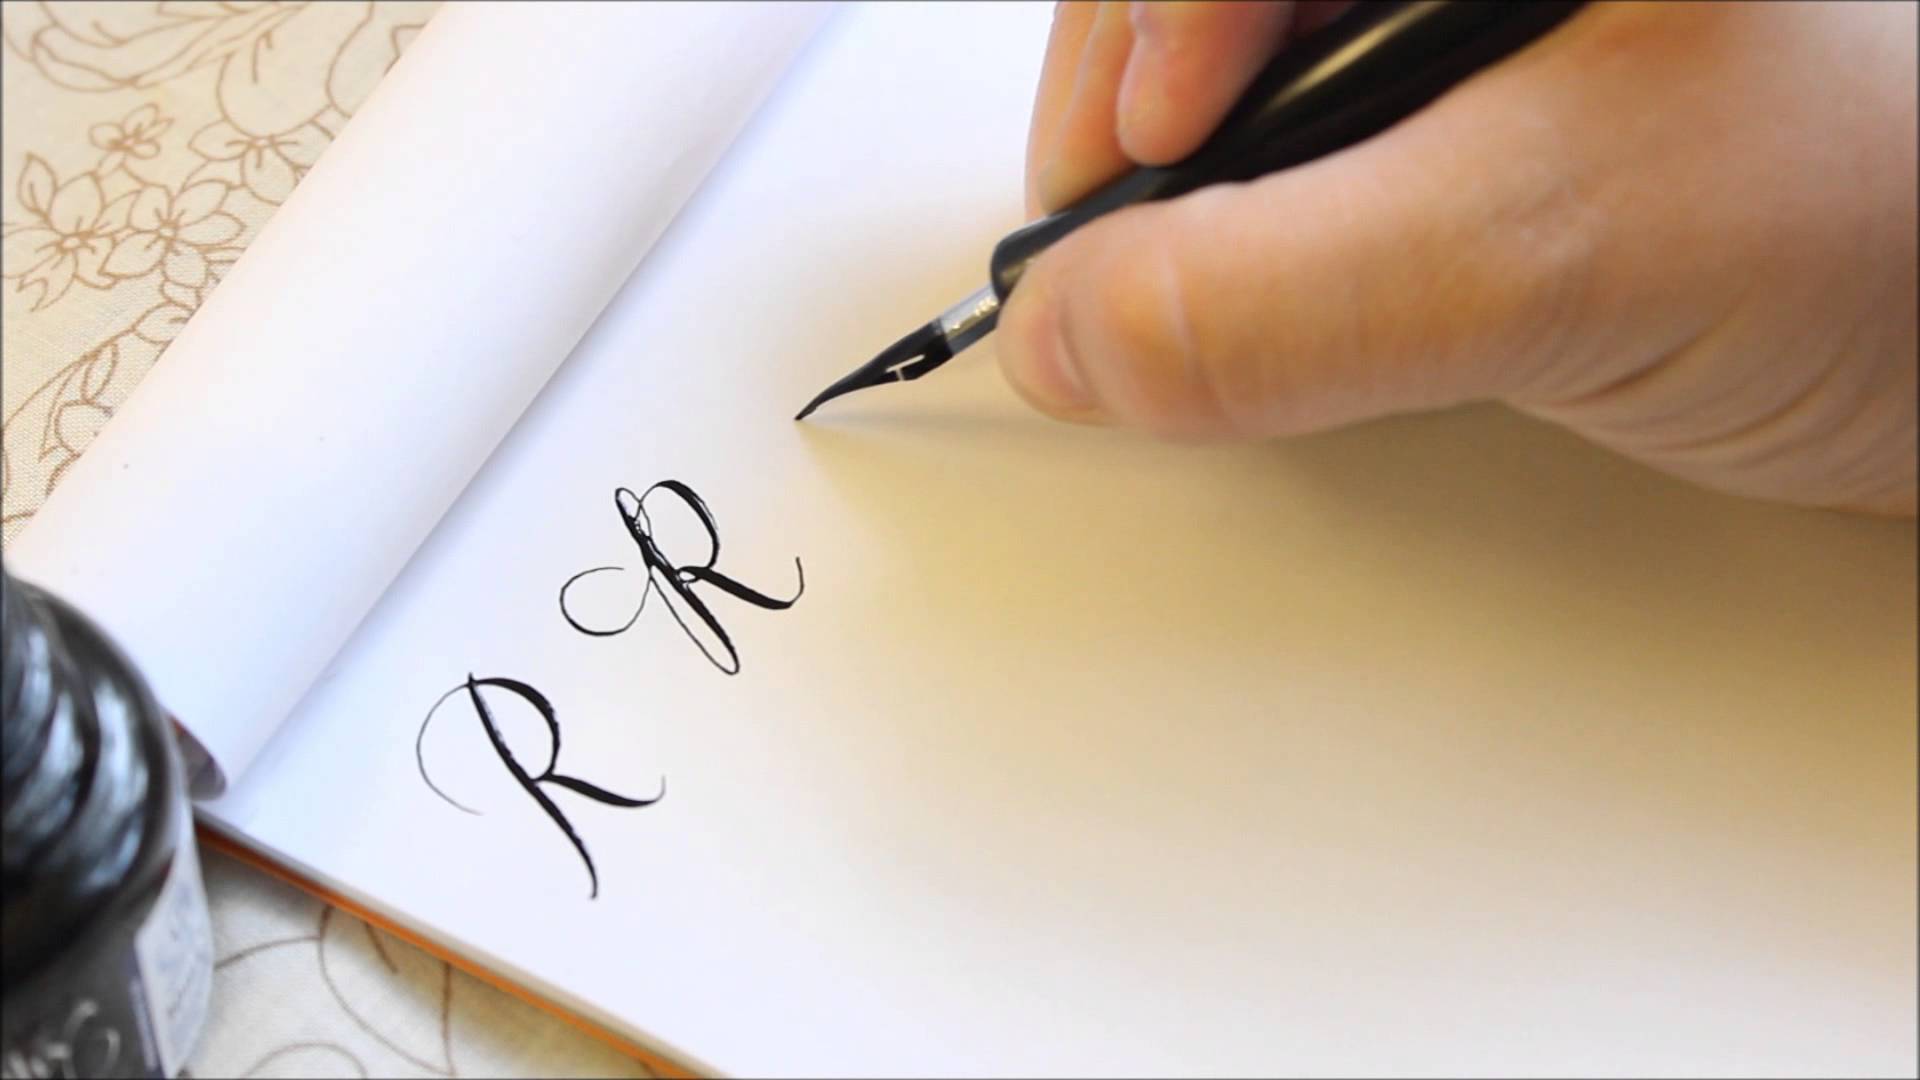 The Letter R. Basic Calligraphy Tutorial